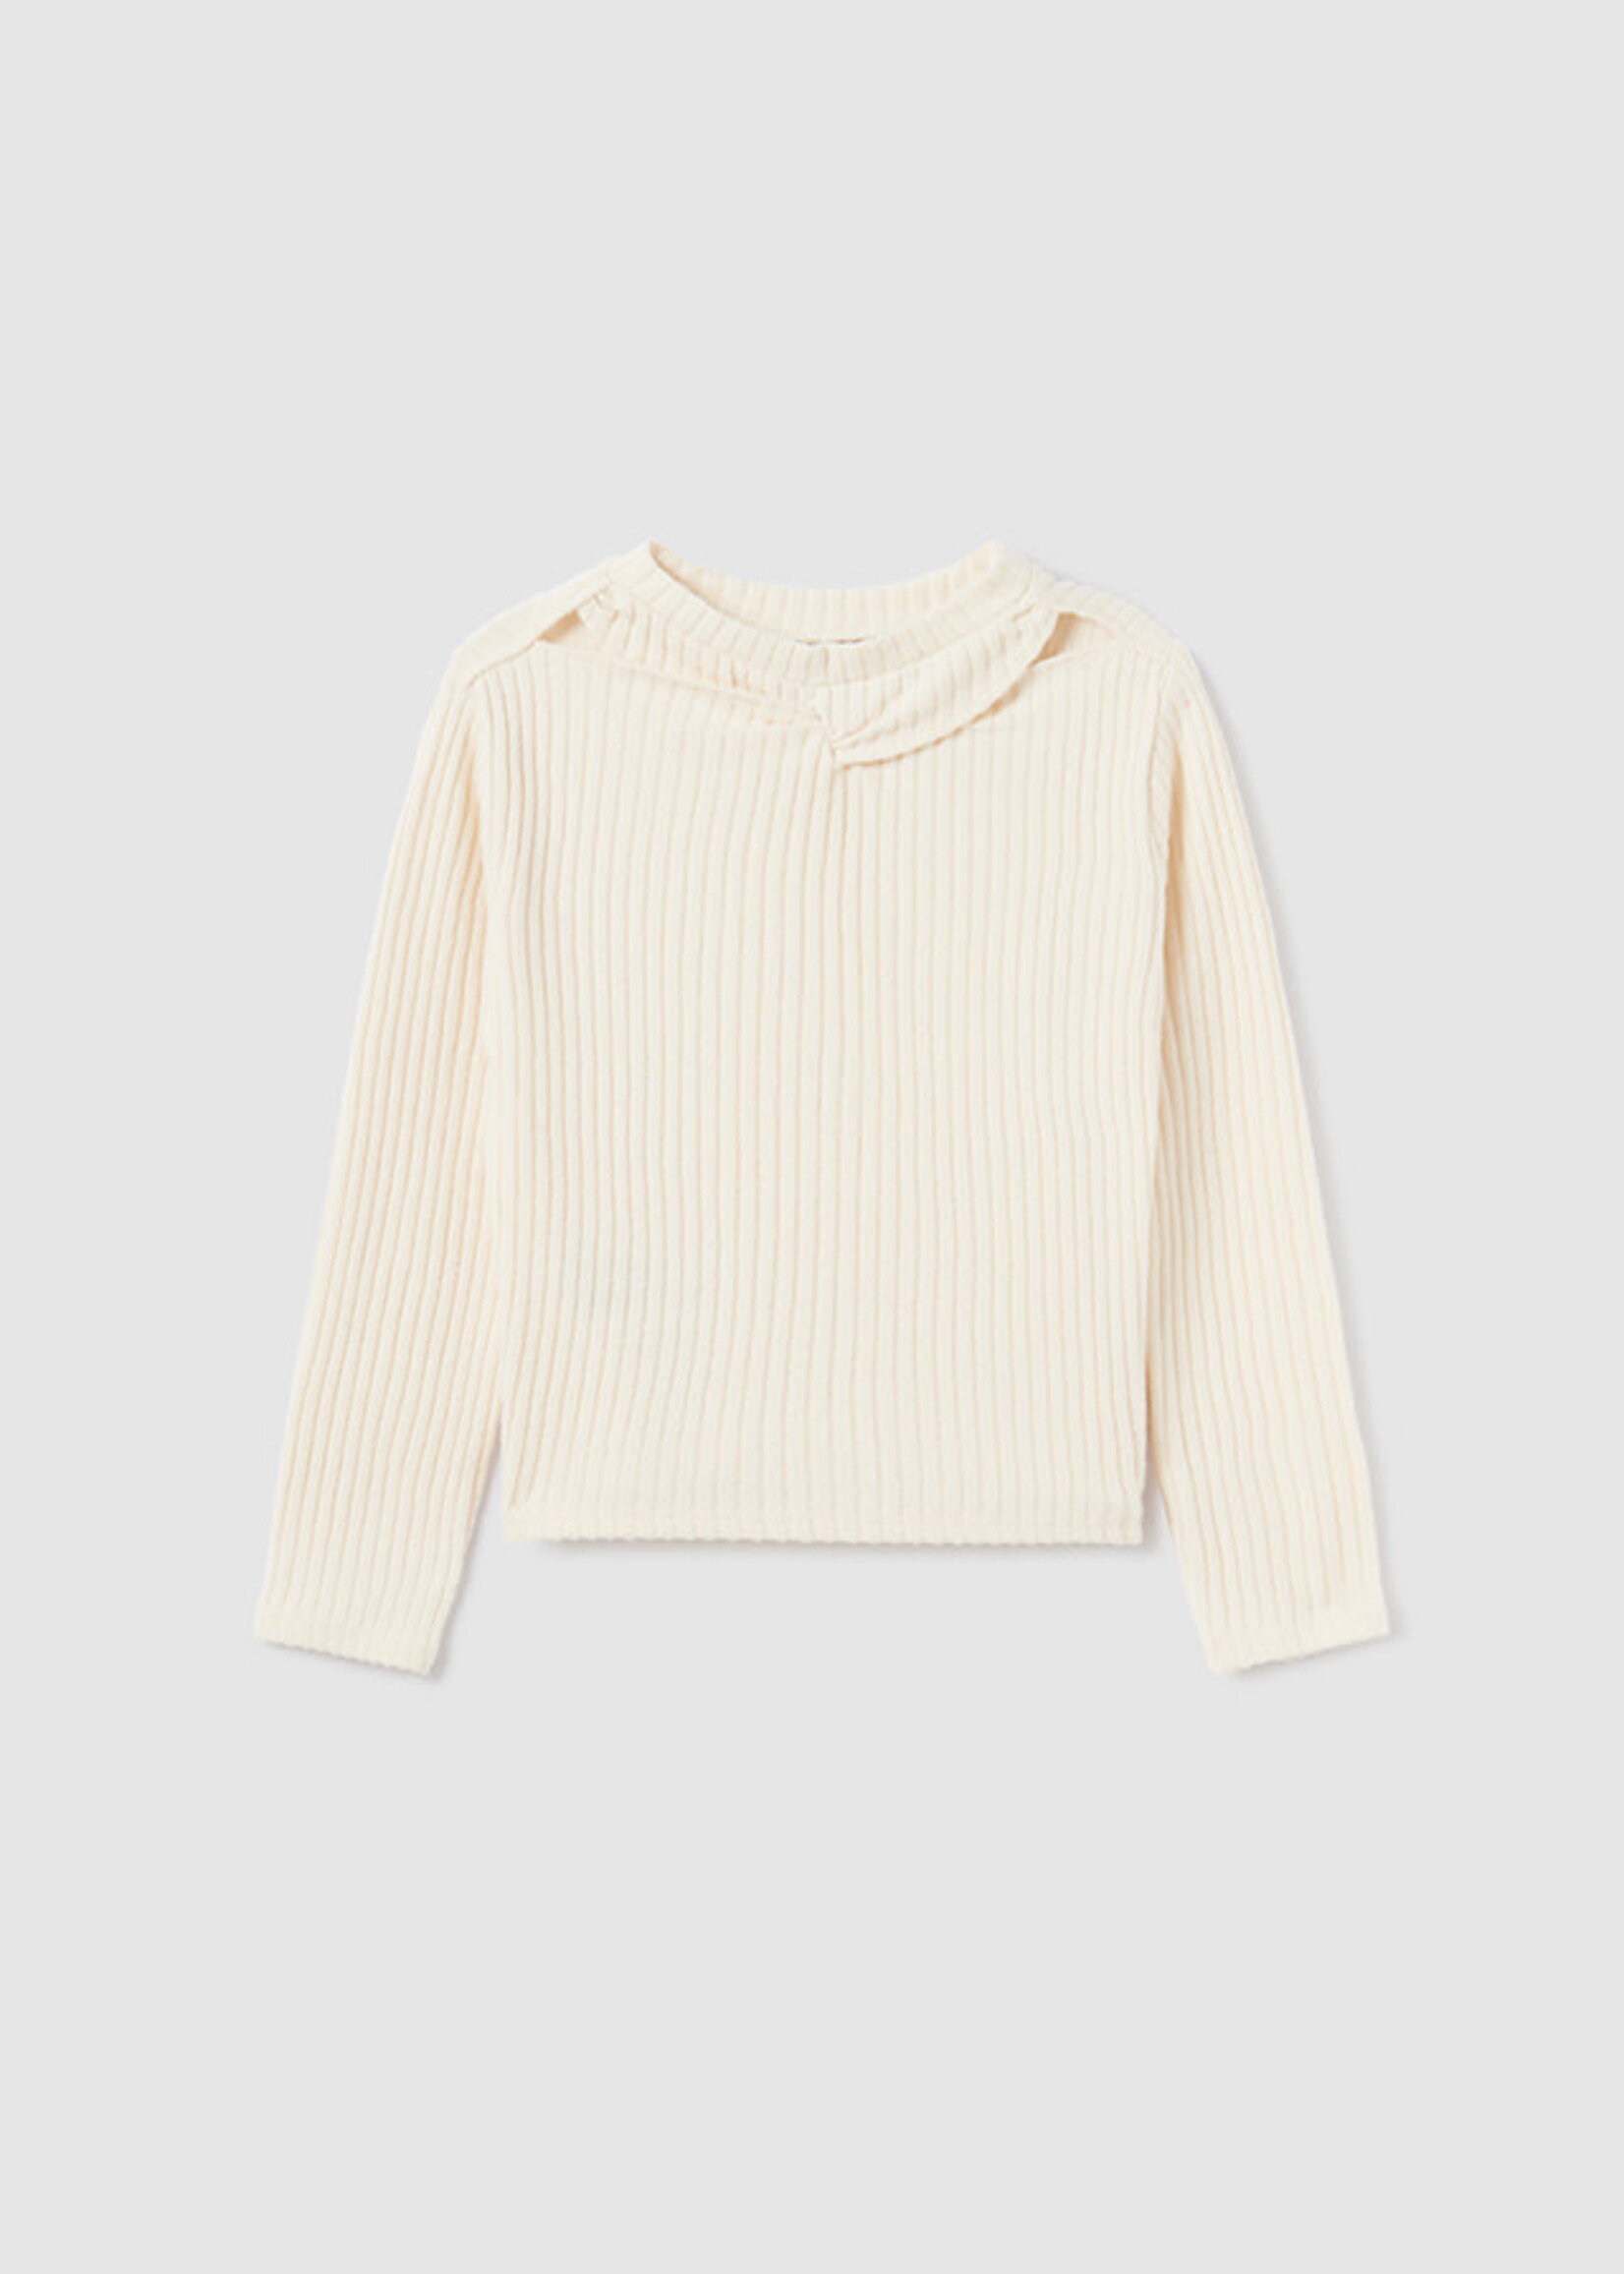 Mayoral Mayoral L/s ribbed shirt Chickpea - 23 07051